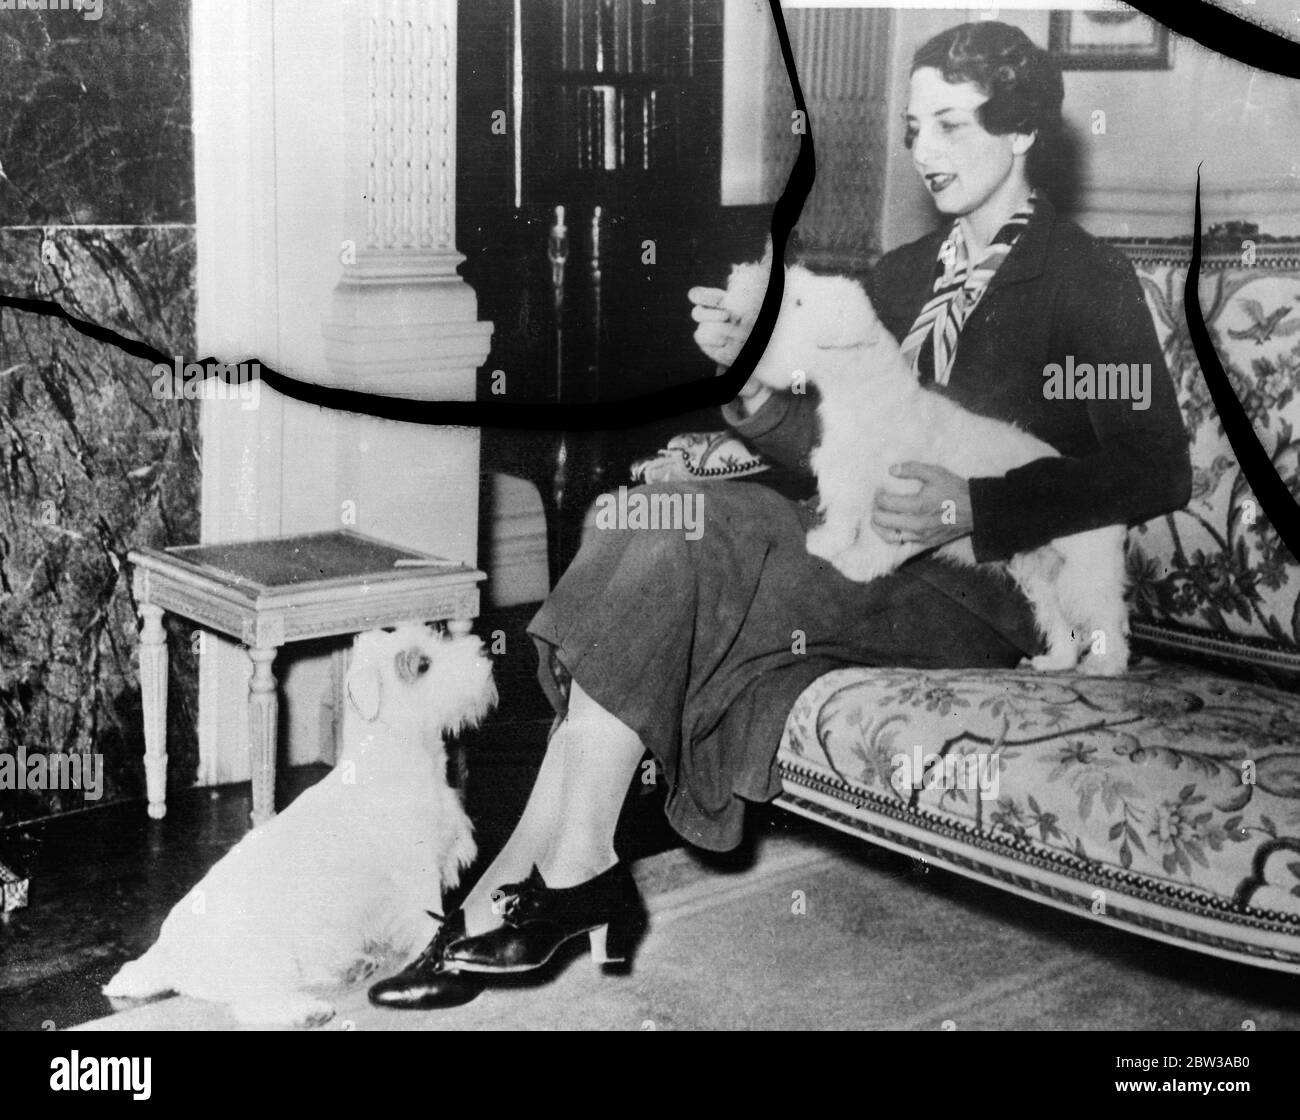 Mrs Helen Wills Moody dog fancier now . Mrs Helen Wills Moody , the tennis courts ' queen ' , who has also achieved success in art competitions , is now entering a new field of endeavour , dog shows . Photo shows , Mrs Helen Wills Moody with her two prize winning Sealyhams at her San Francisco home . 6 January 1934 Stock Photo